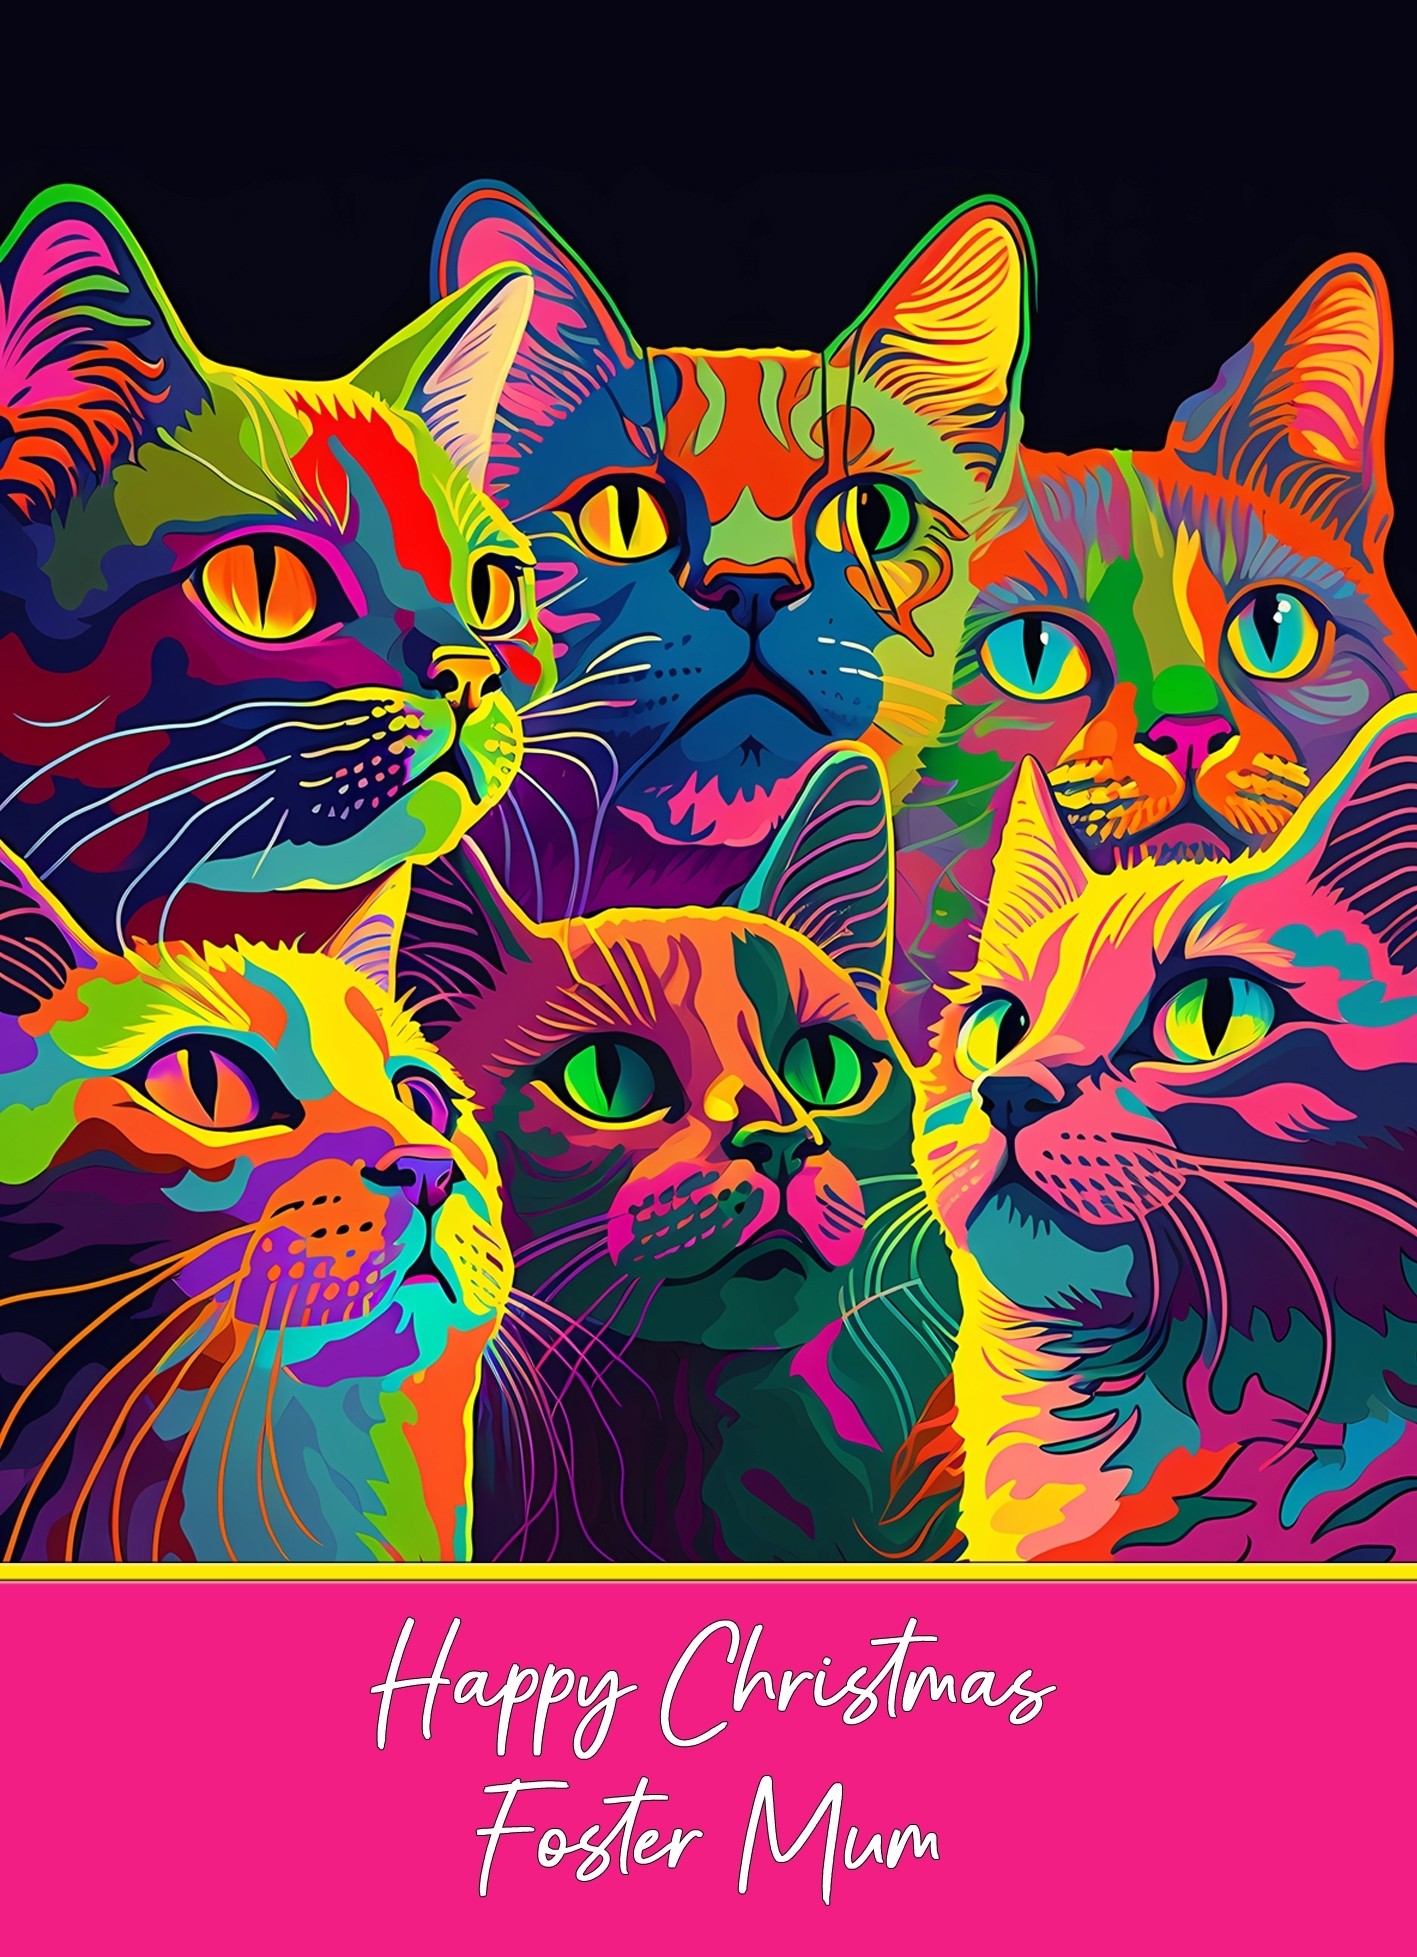 Christmas Card For Foster Mum (Colourful Cat Art)